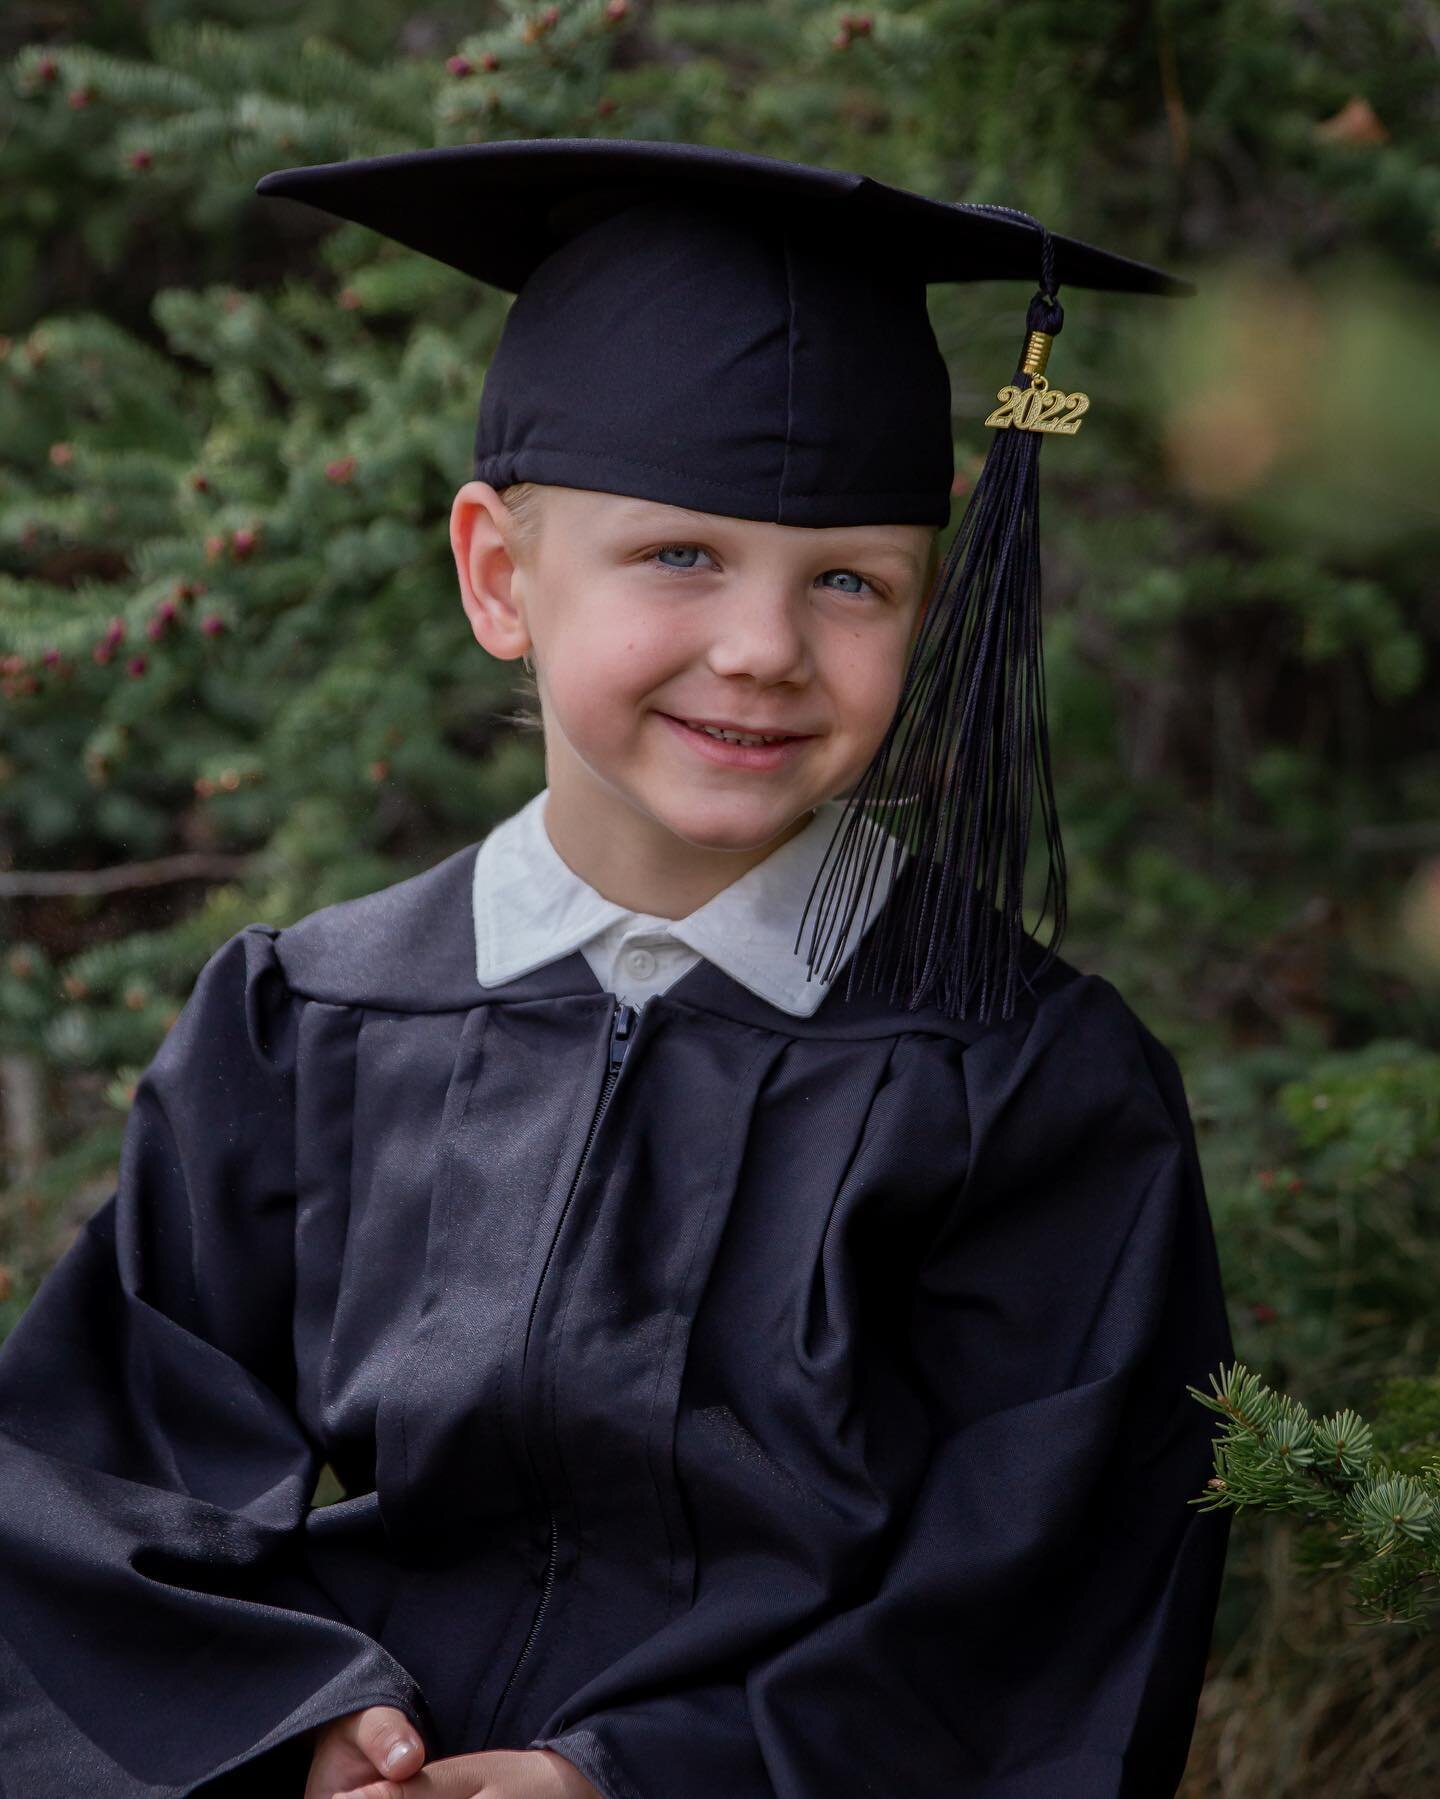 These little graduates have a pretty special spot in my heart. So. Darn. Cute. 

Have a proud little kindergartner? It&rsquo;s not too late to celebrate with cap and gown photos! DM me for details. 

#kindergarten #kindergartengraduate #yyckids #yycw